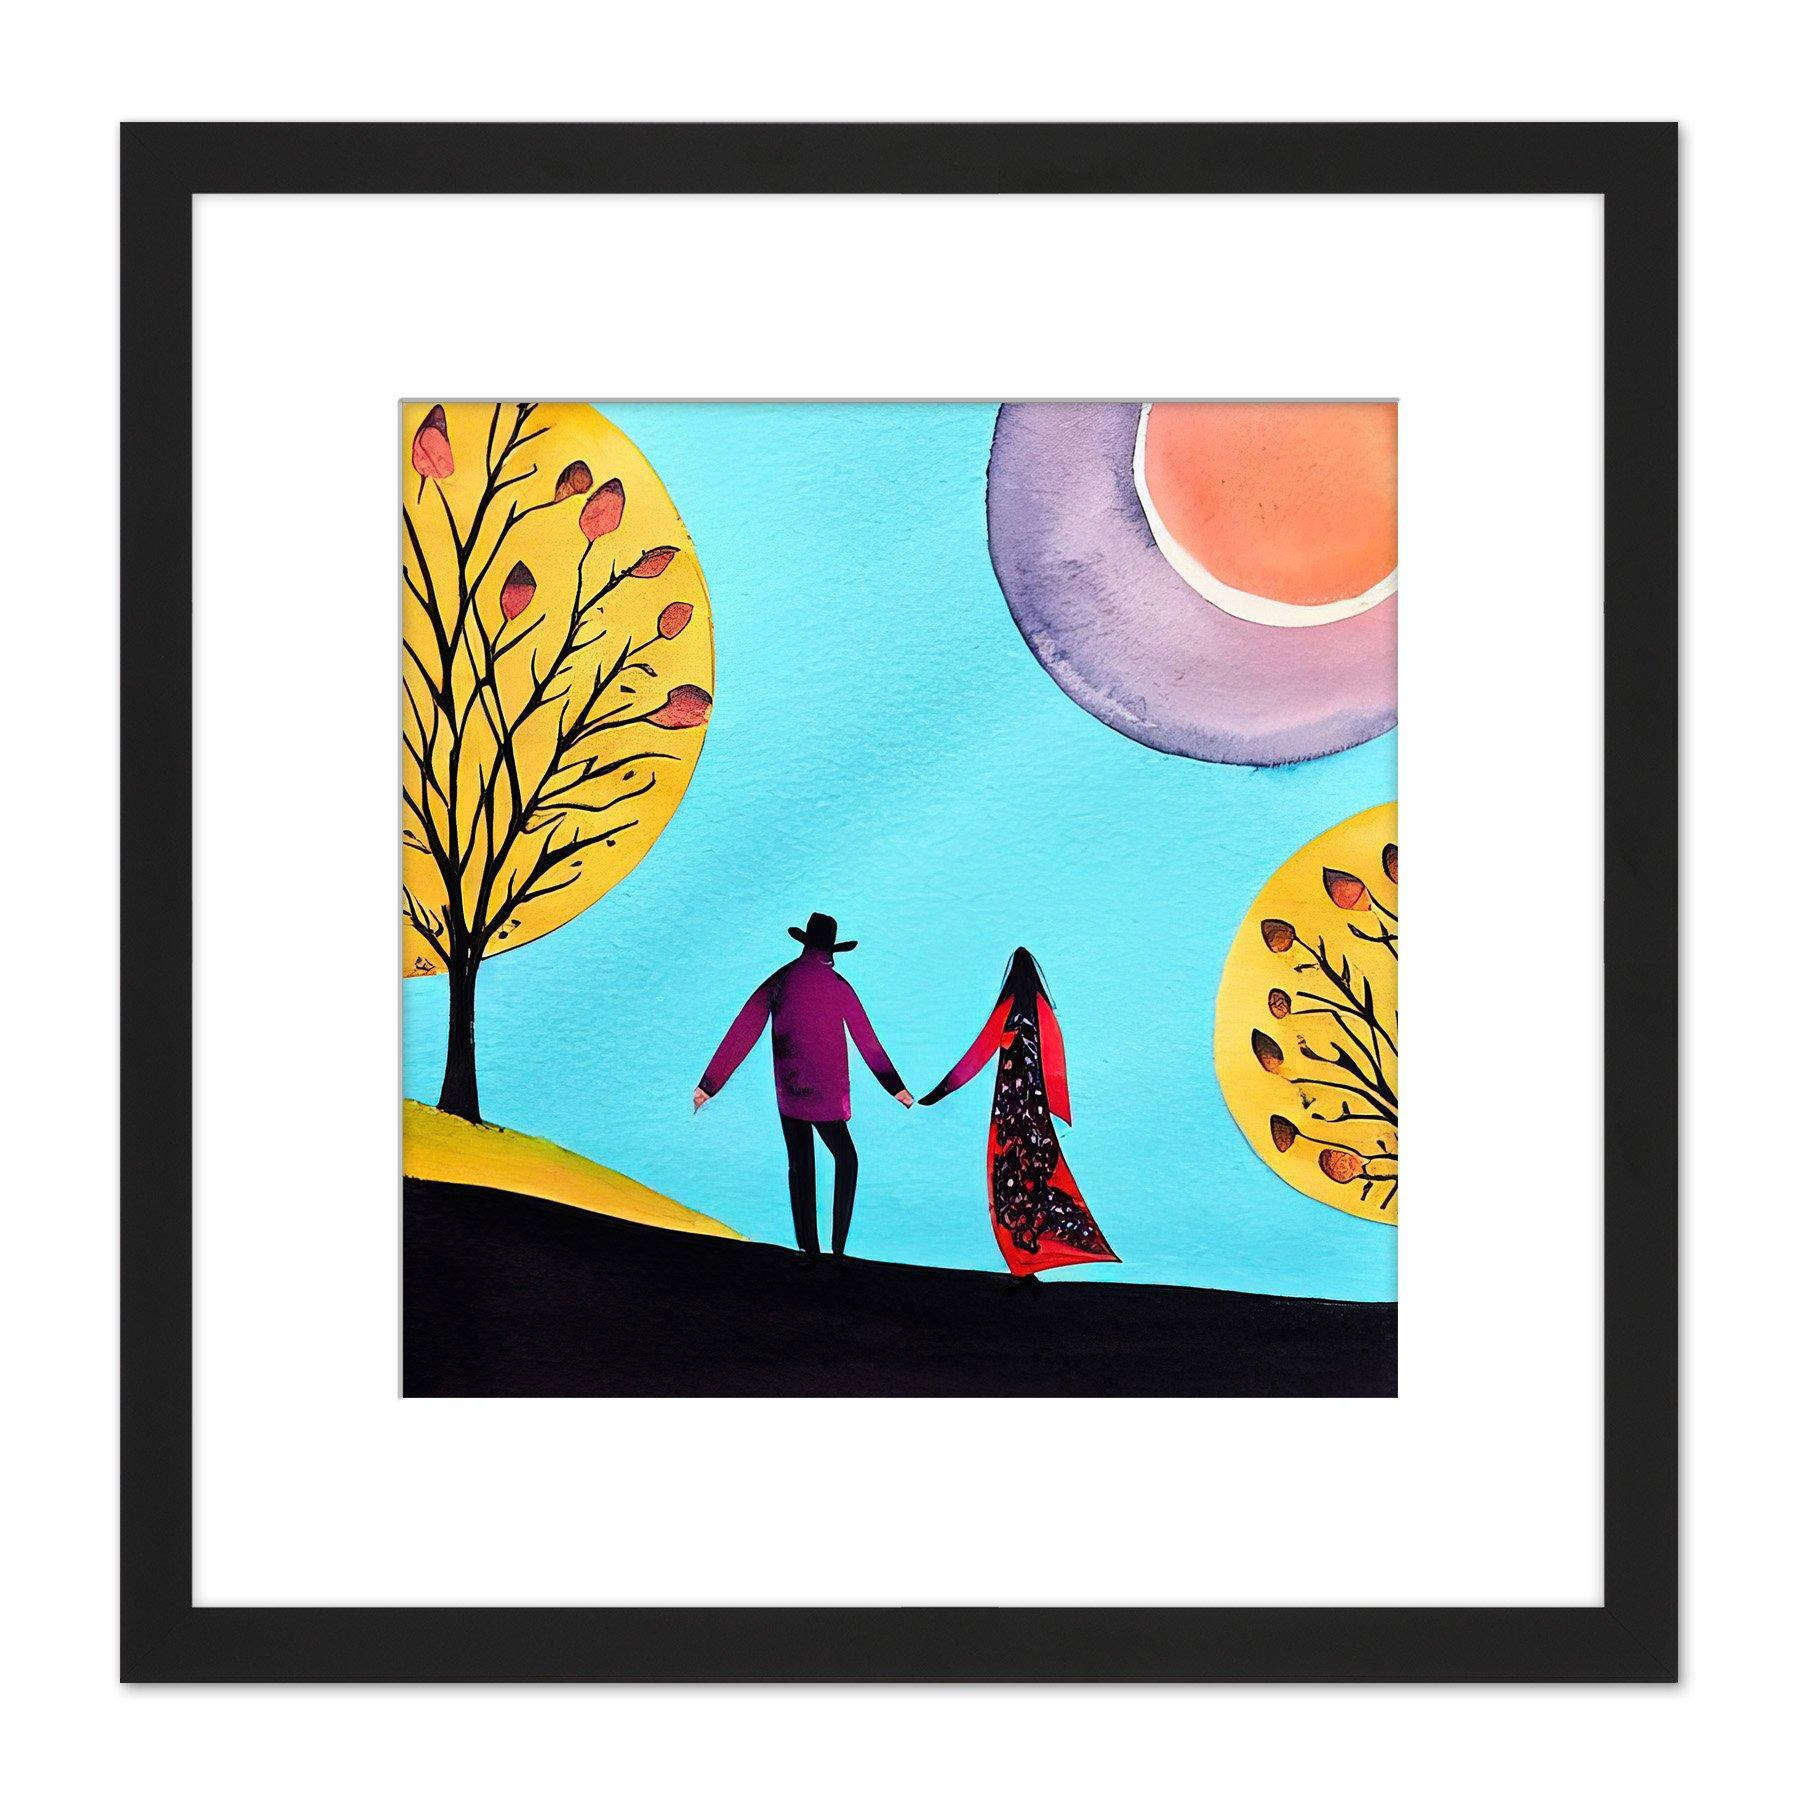 Evening Walk In Autumn Fall Couple In Love Holding Hands. Square Wooden Framed Wall Art Print Picture 8X8 Inch - image 1